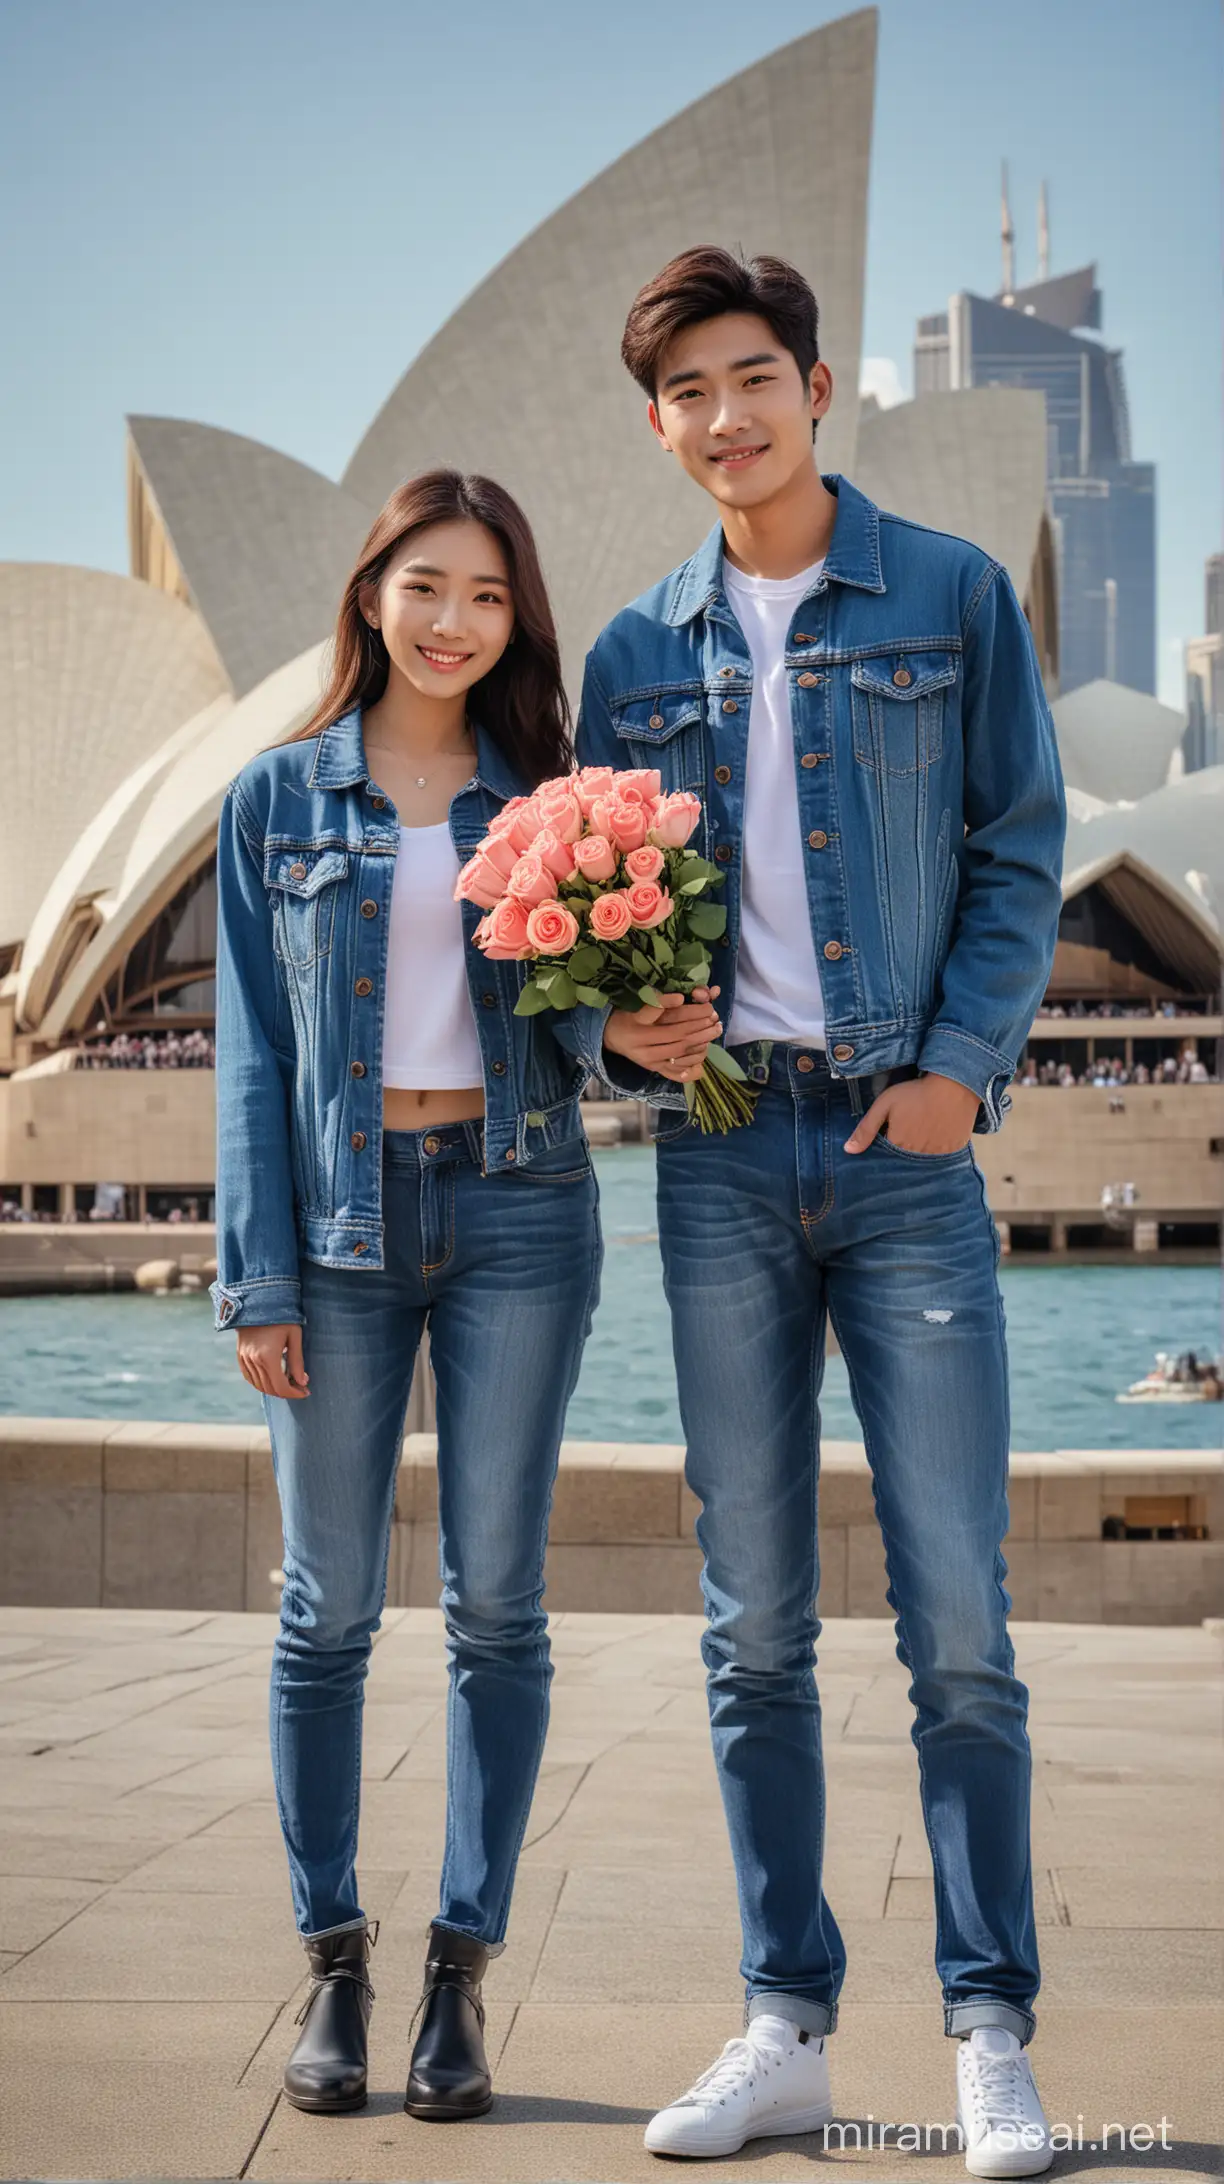 Korean Couple at Sydney Opera House with Rose Bouquet and Professional Camera